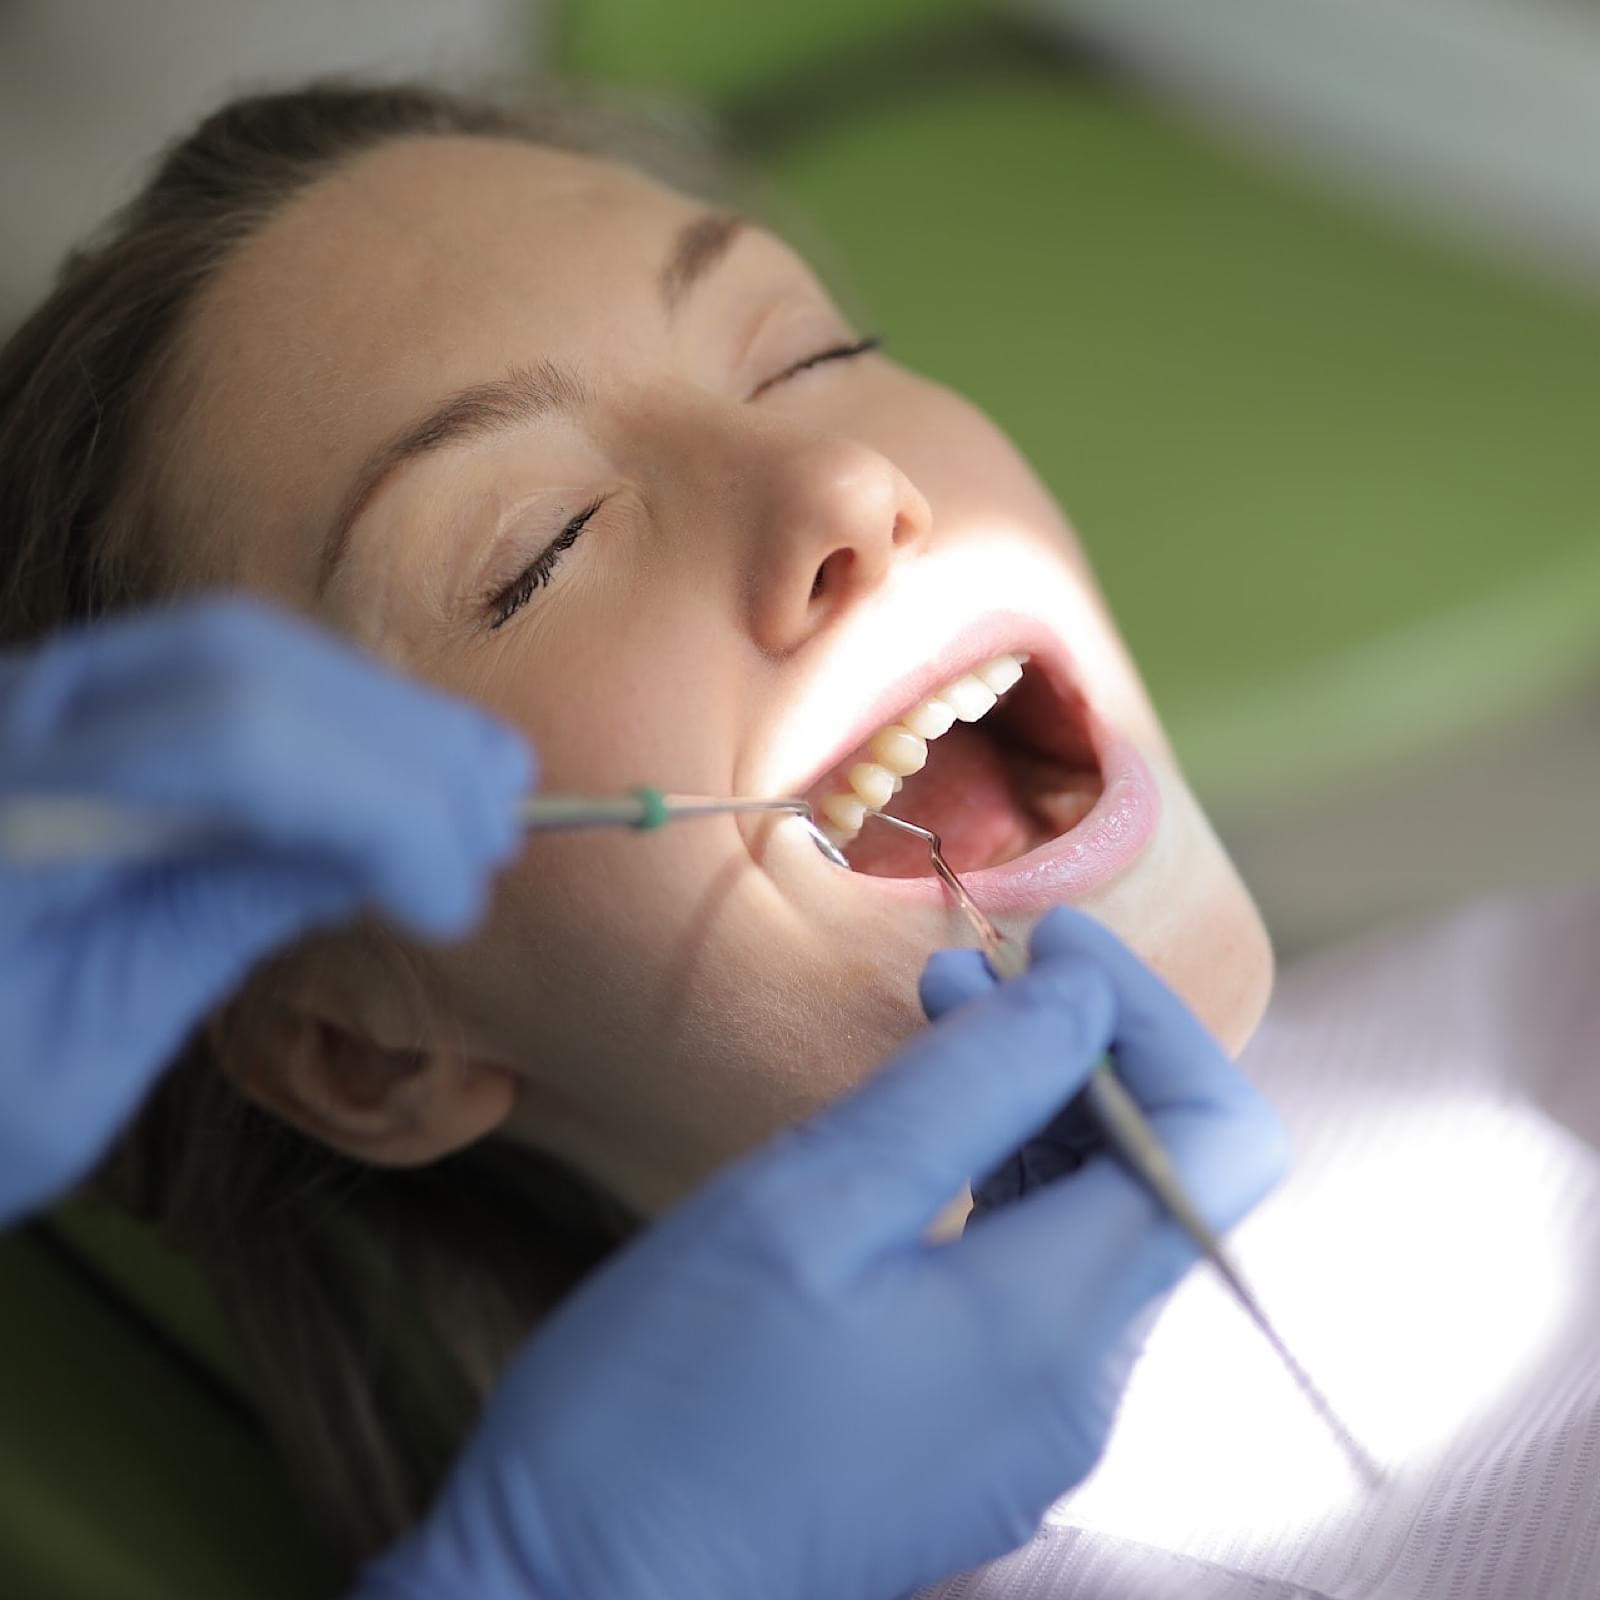 Help from Miami Dentist to Carefully Remove Mercury Fillings